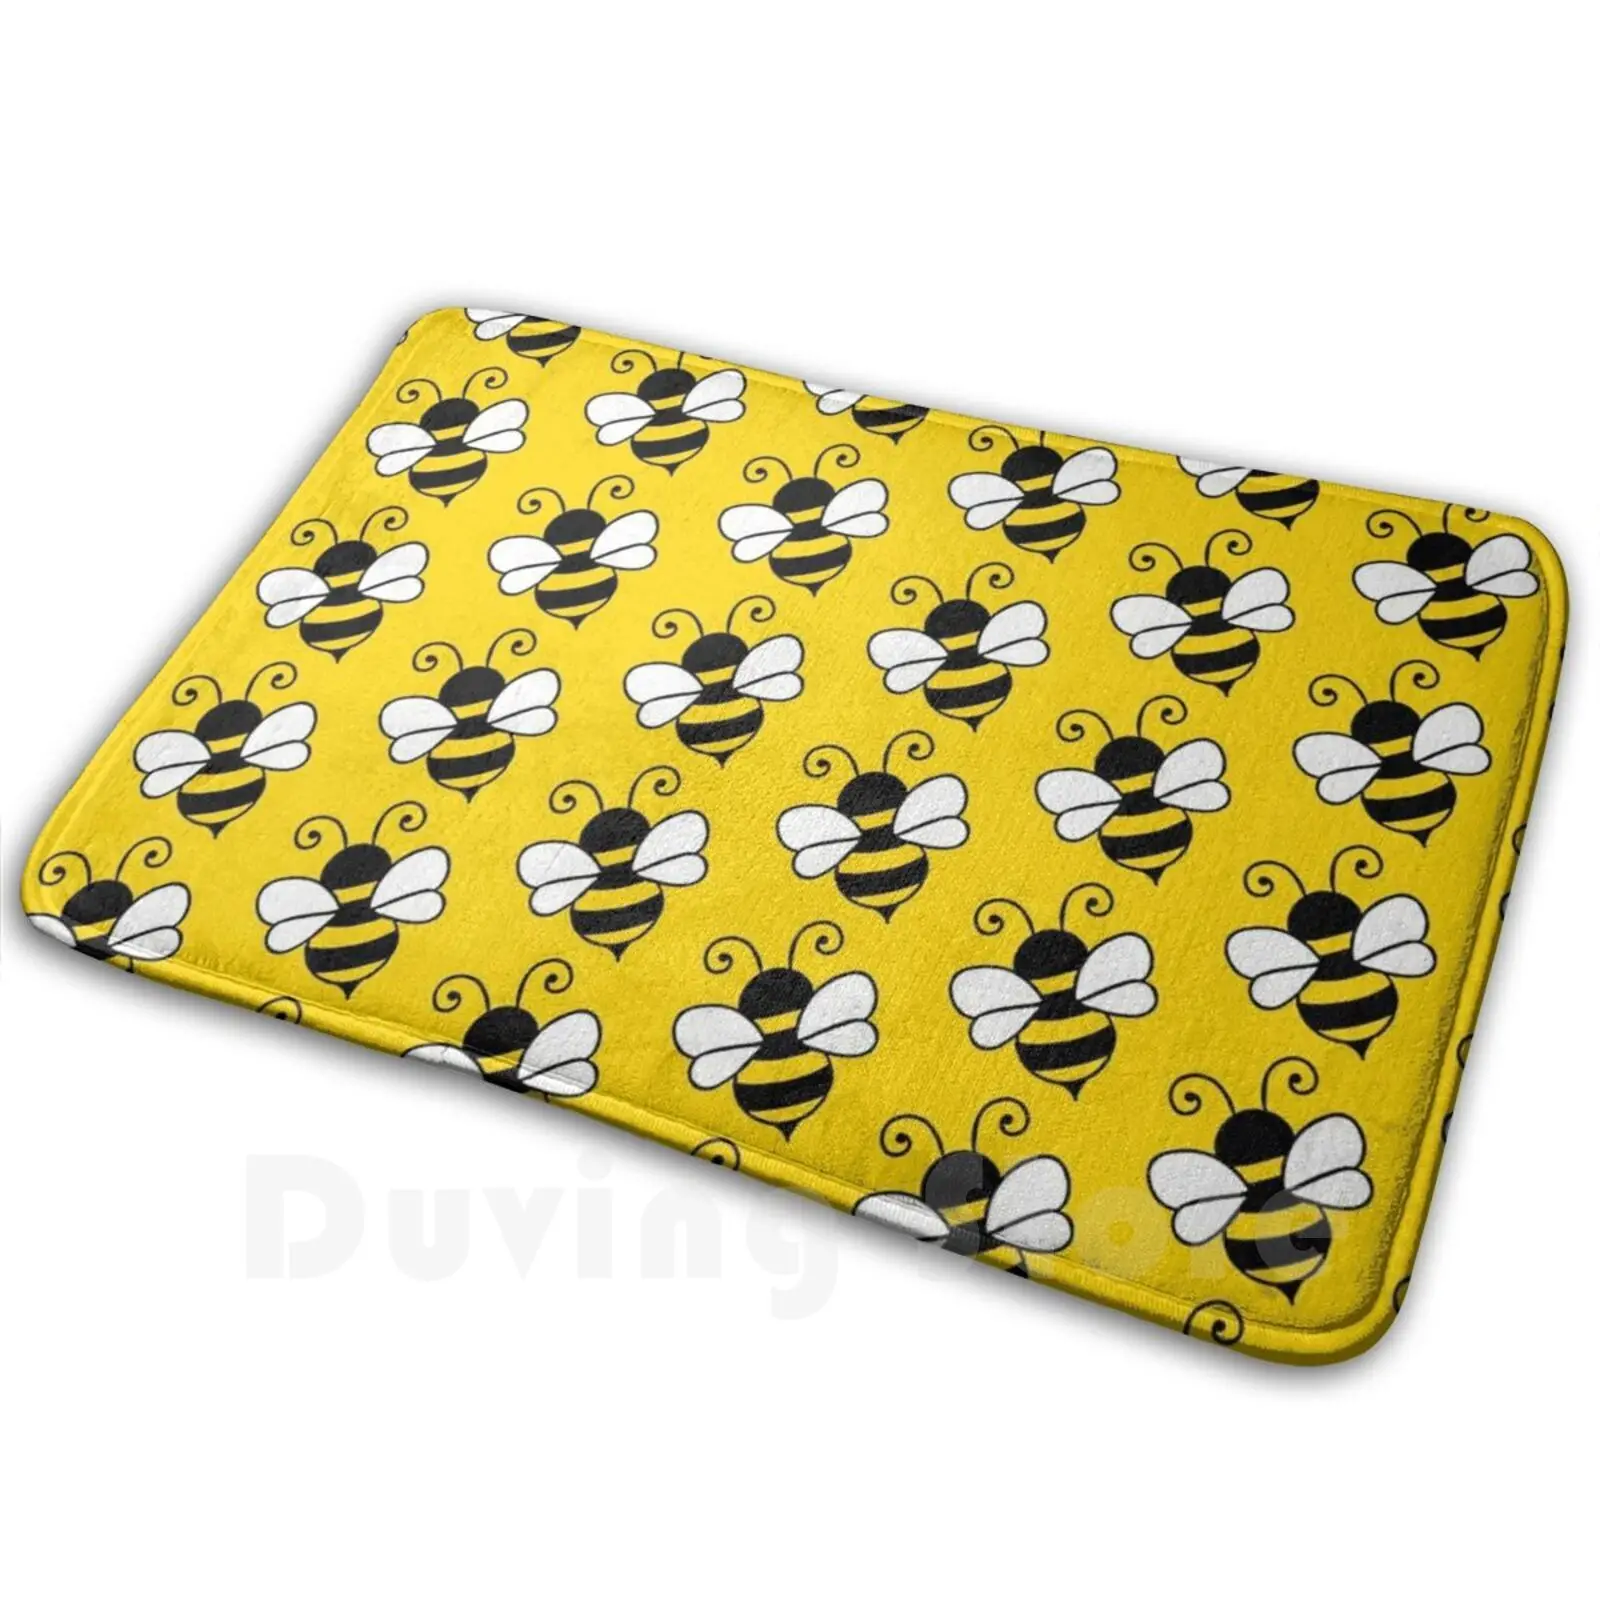 

Beezin Carpet Mat Rug Cushion Soft Non-Slip Bee Bumblebee Cute Cottagecore Golden Yellow Honey Bees Save The Bees Earth